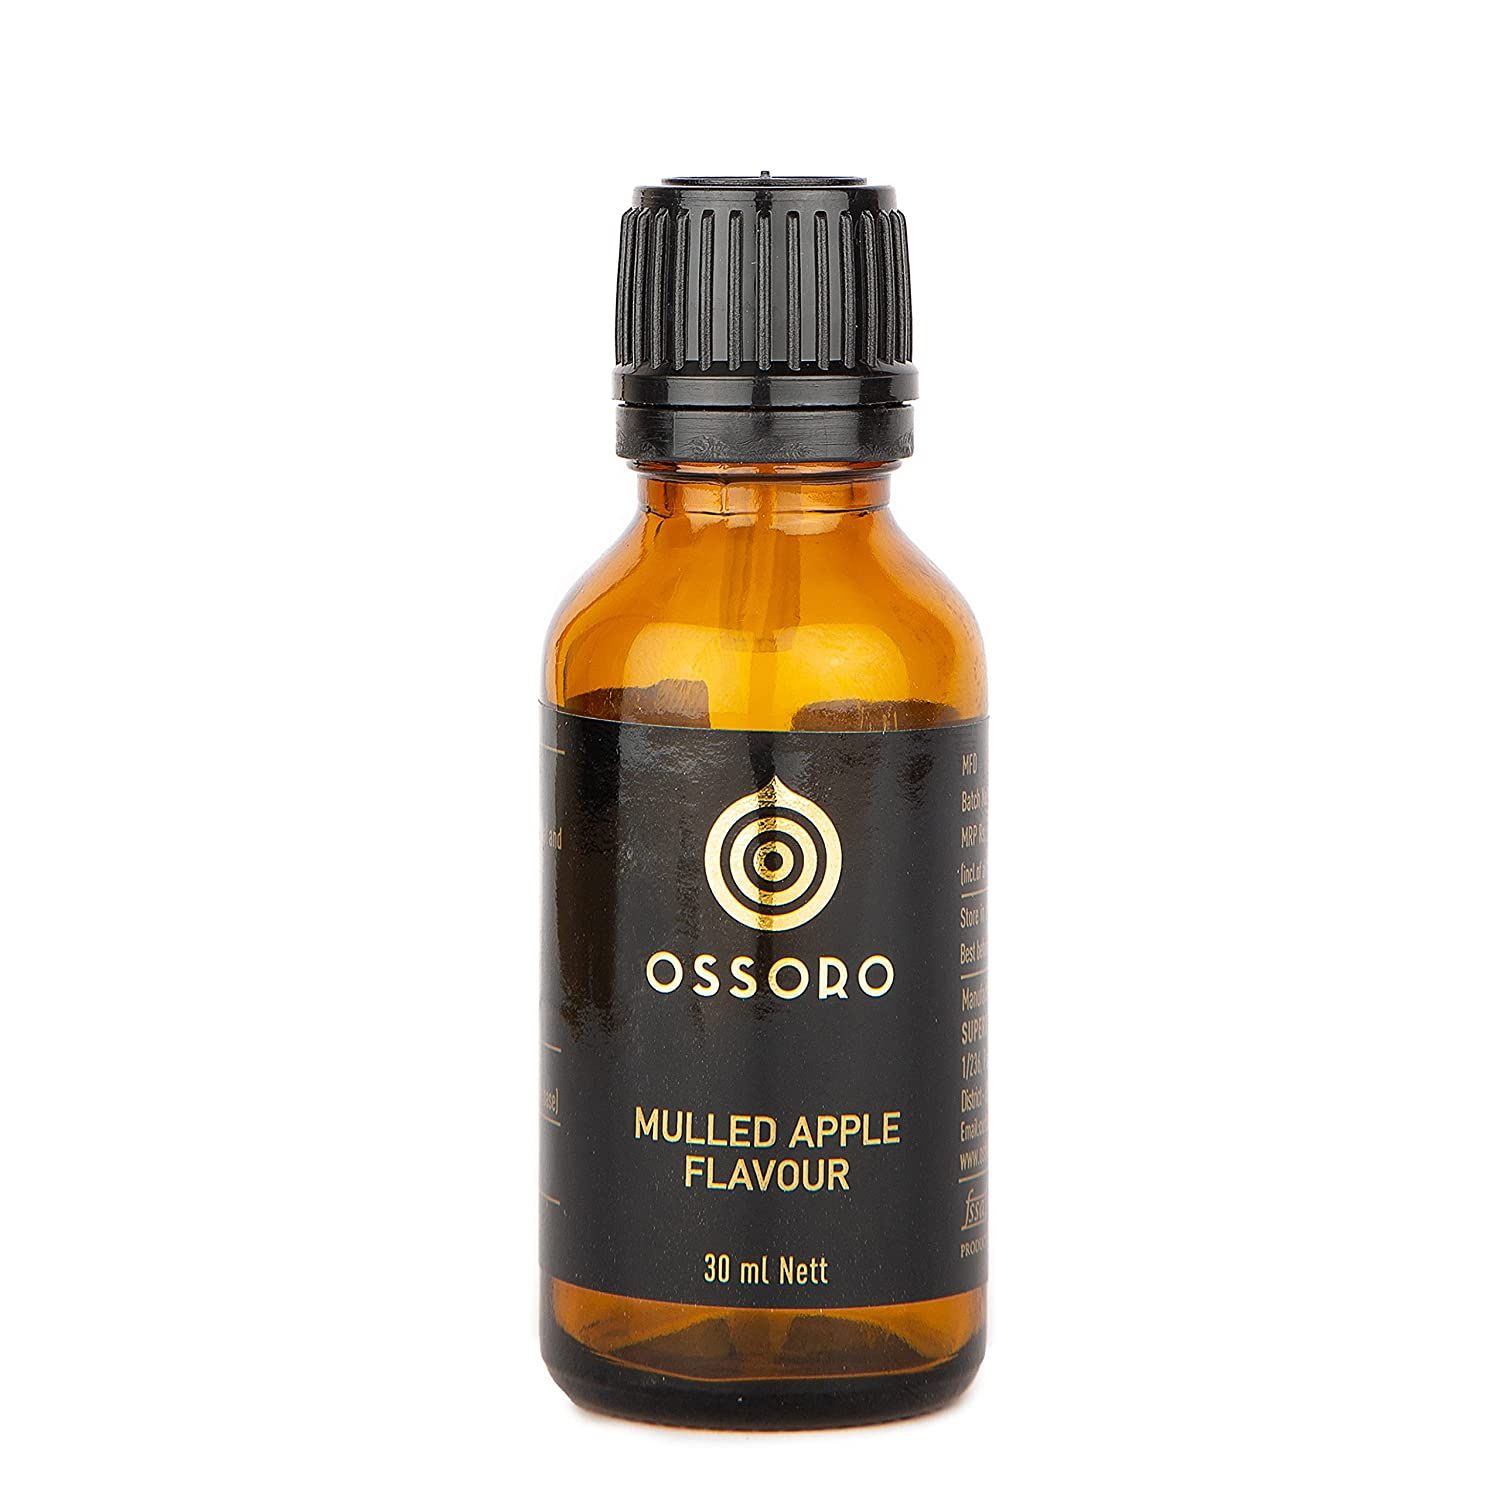 Ossoro Mulled Apple Flavour Image